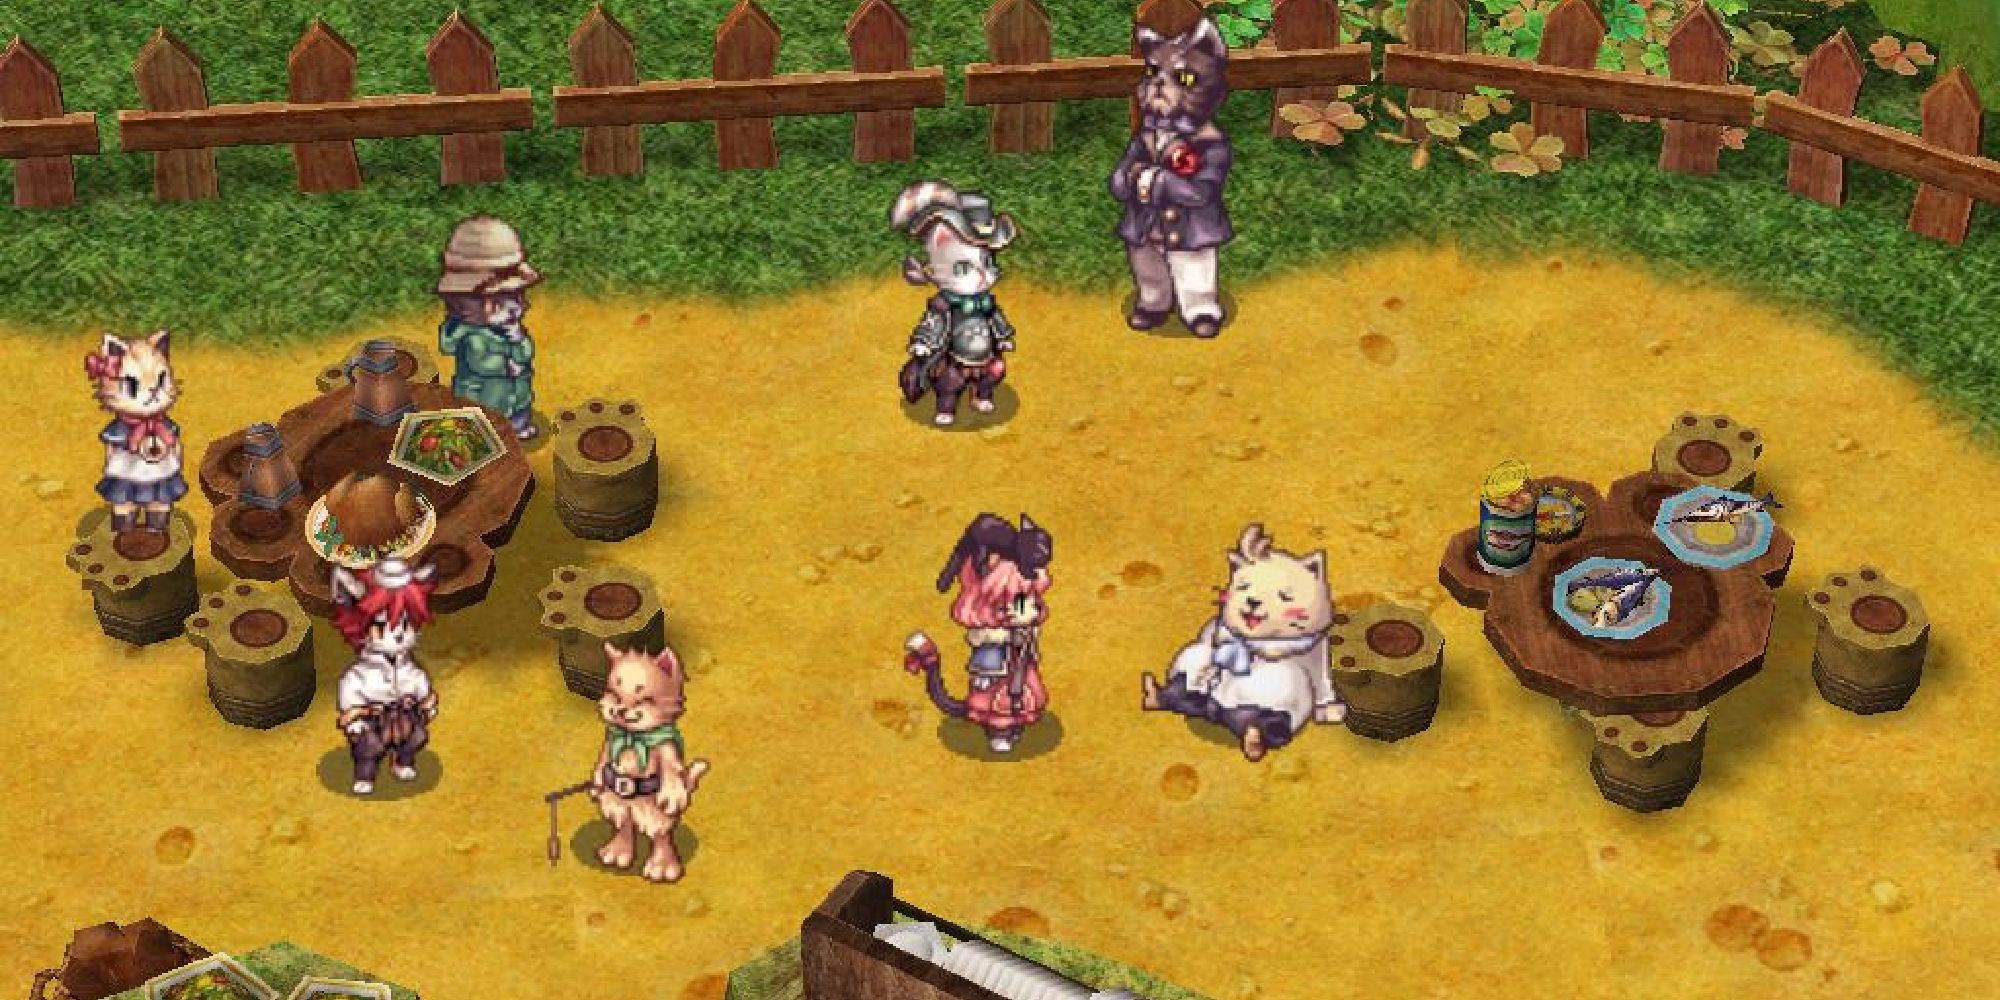 A screenshot from Gravity Games' MMORPG Ragnarok Online, showing the player character hanging out in a village of cats